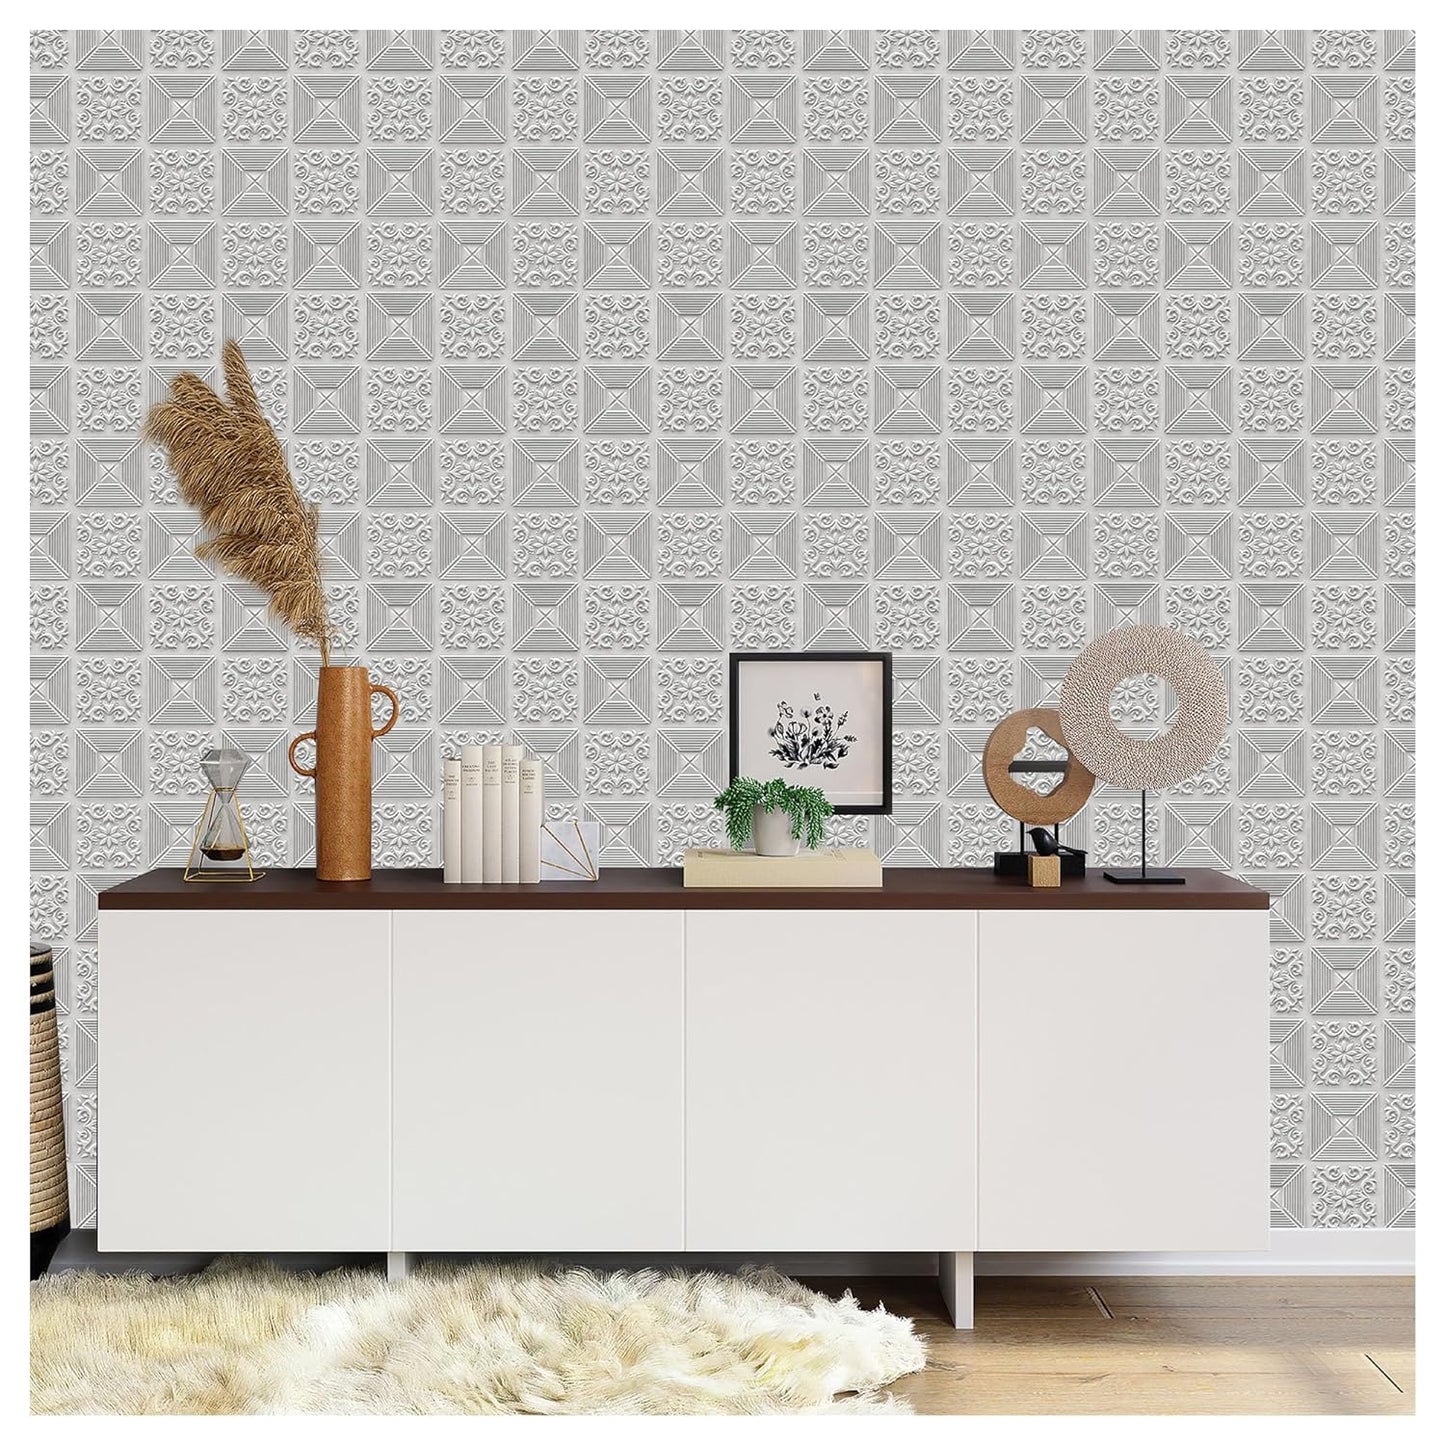 Kayra Decor 3D Self Adhesive Wall Panel -White Color Flower Pattern - 50 X 50 cm